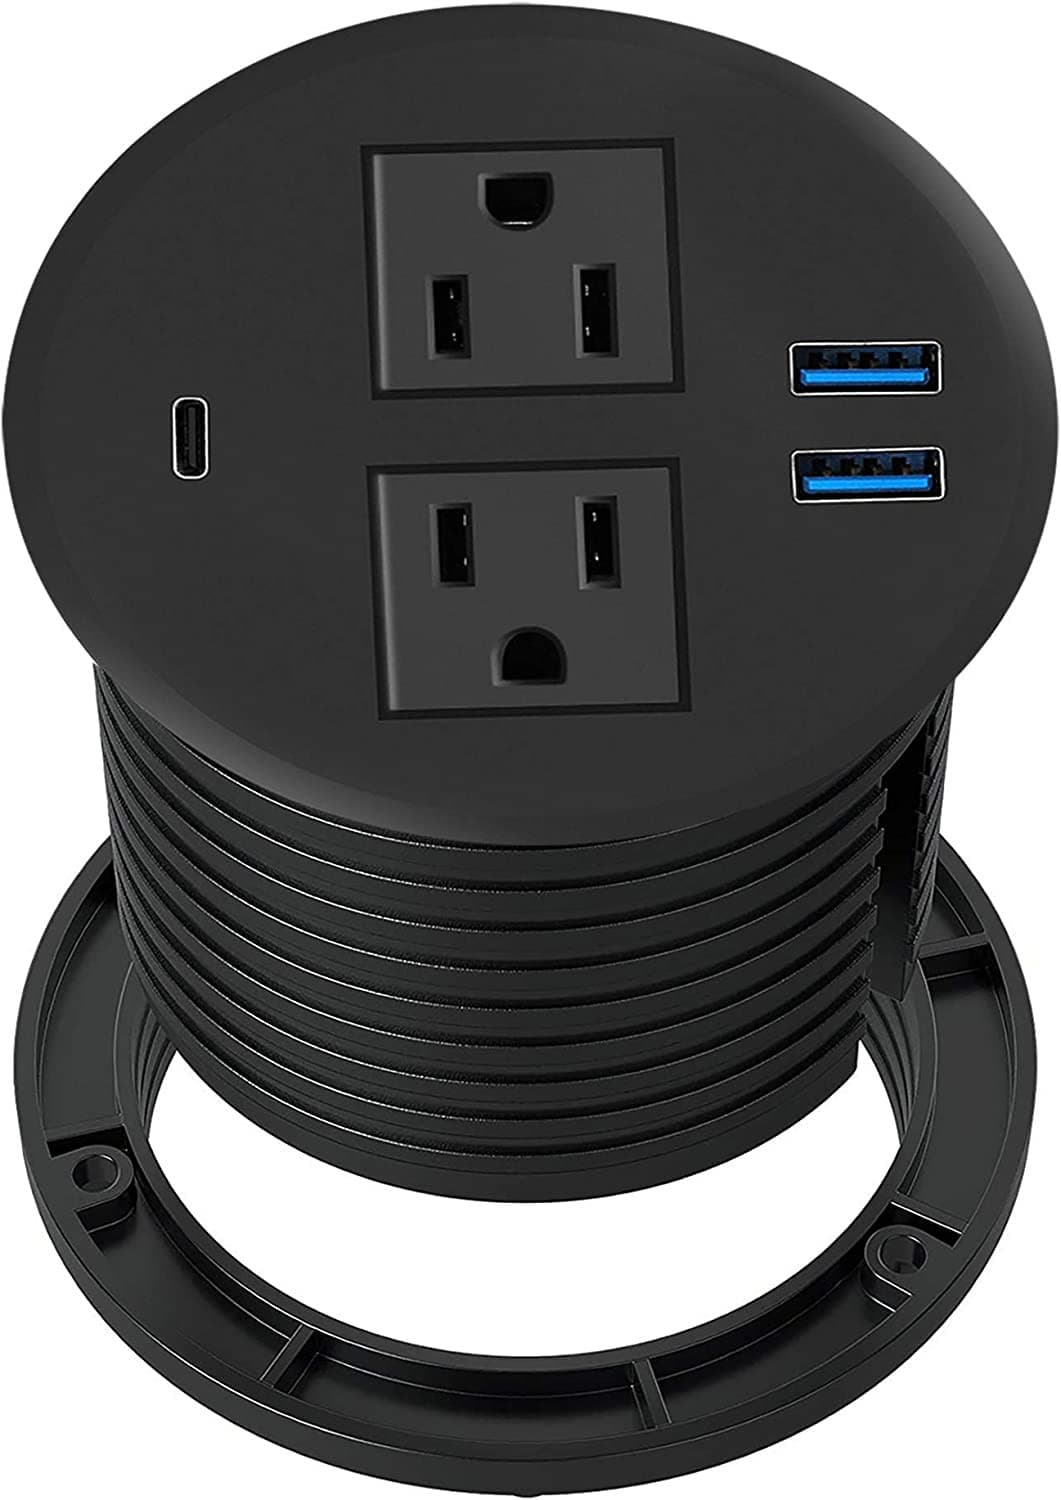 Counter Pop Up With 2 AC Plugs and 3 USB Charging Ports